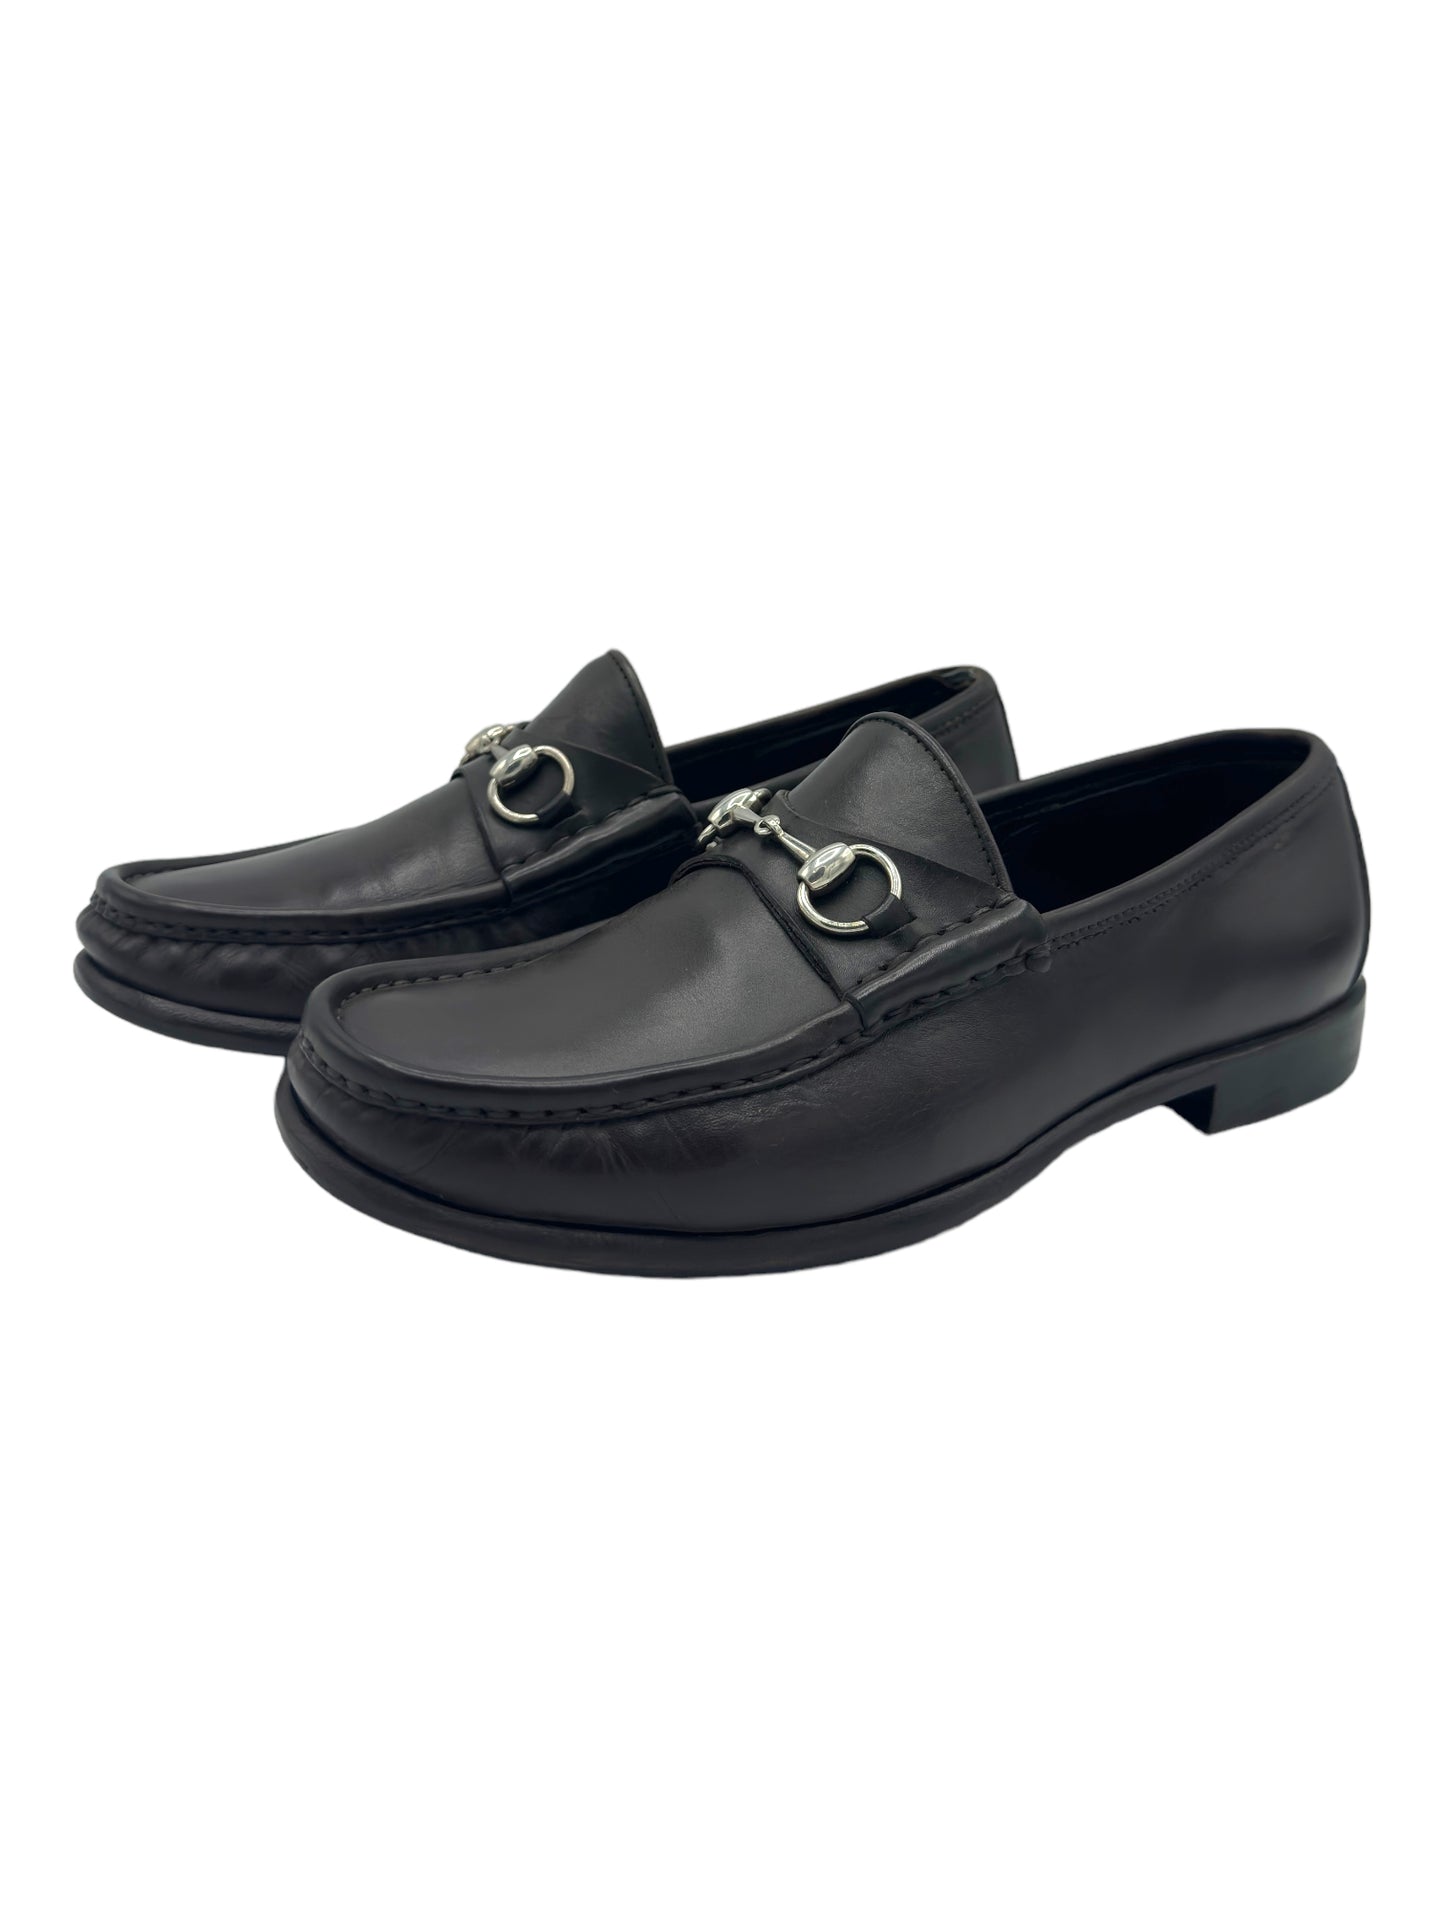 Gucci Brown Horse Bit Leather Loafers - Genuine Design Luxury Consignment for Men. New & Pre-Owned Clothing, Shoes, & Accessories. Calgary, Canada